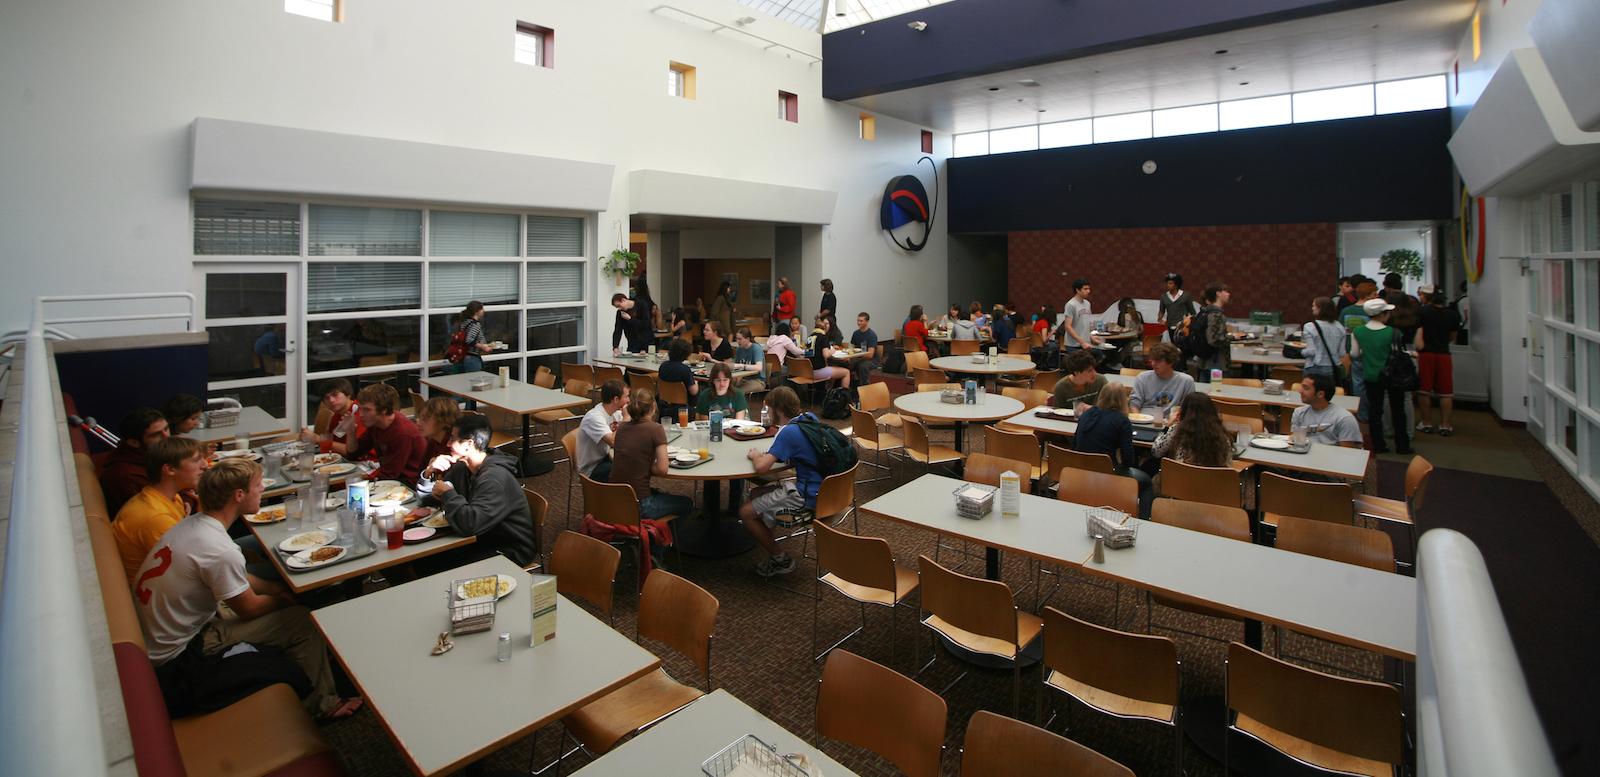 image of cafeteria food station